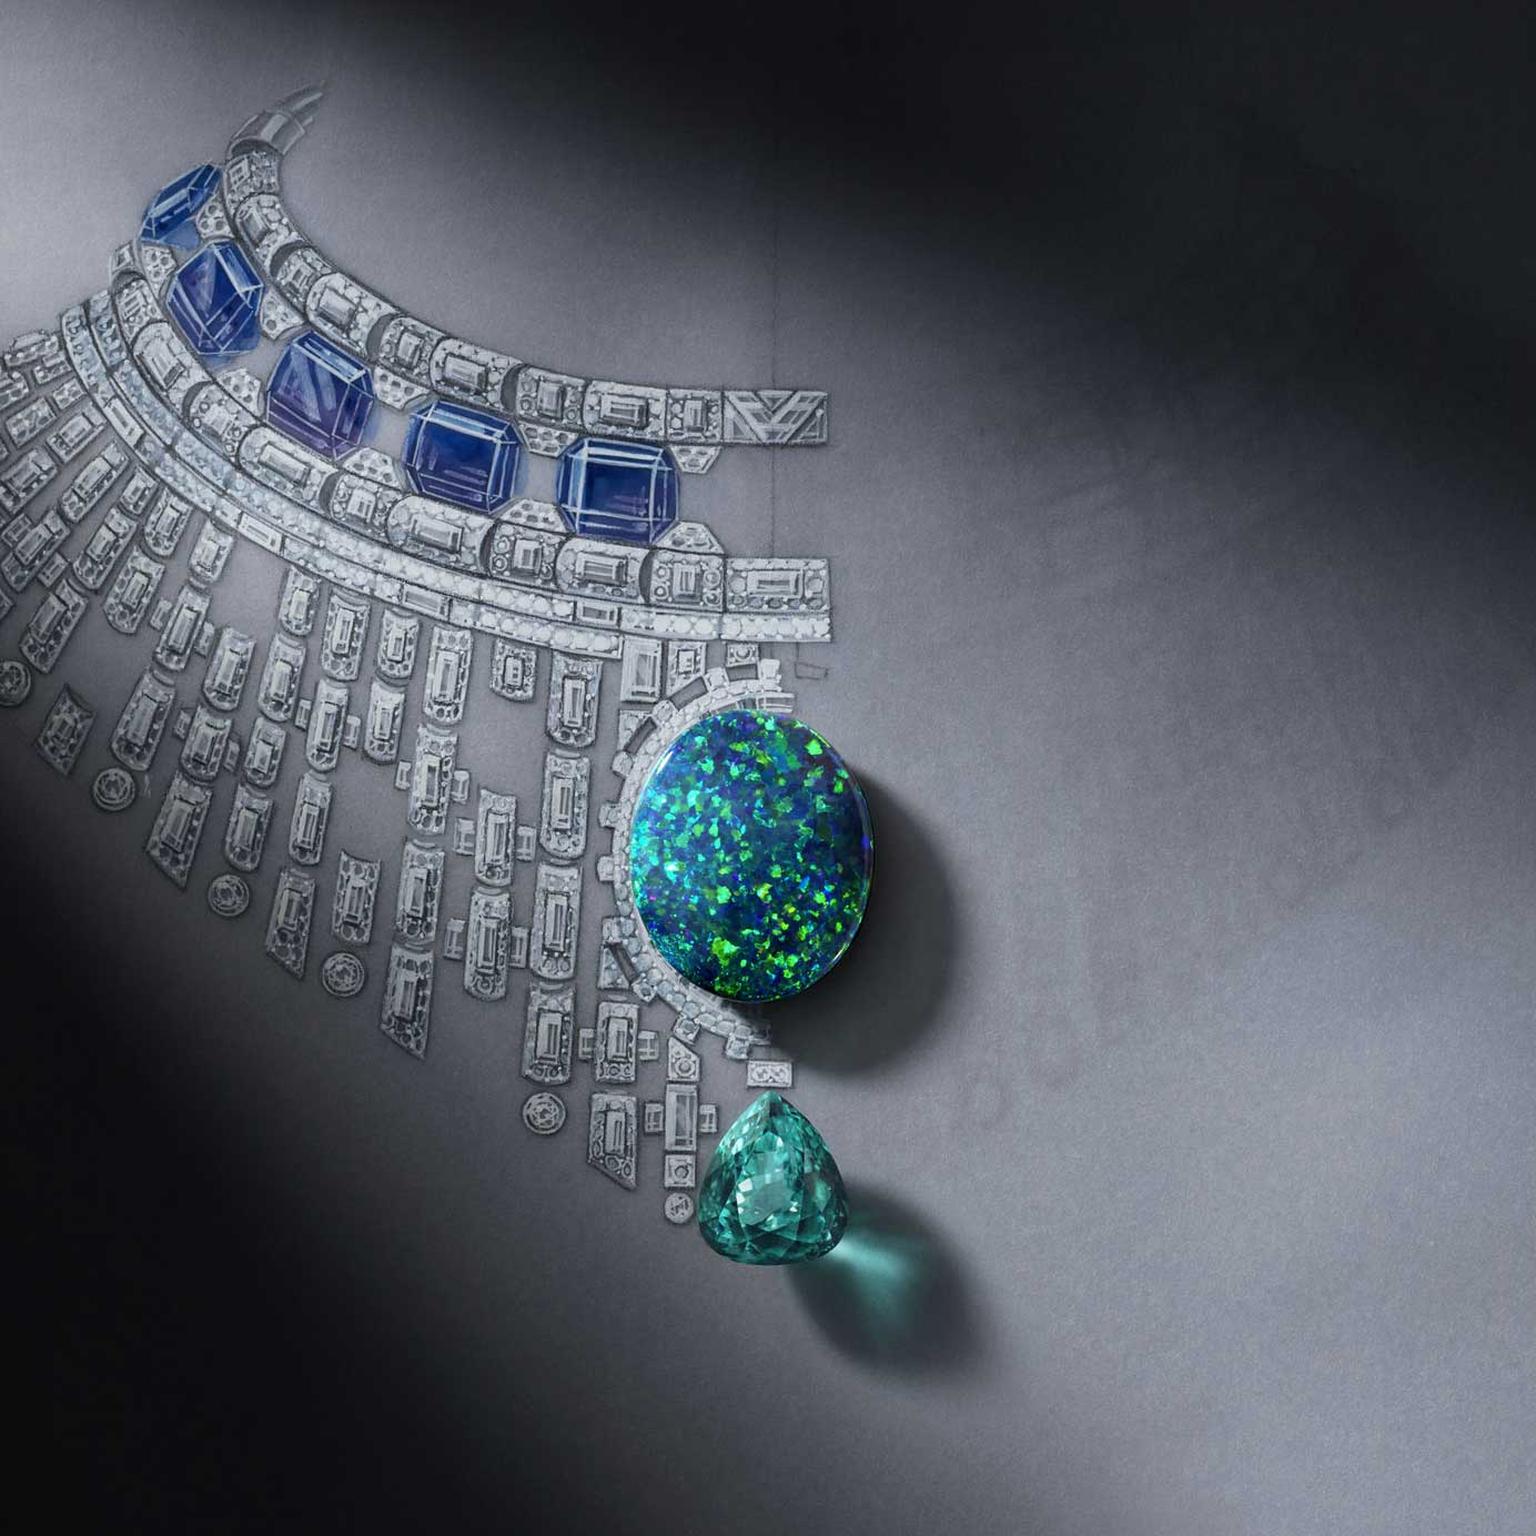 high jewelry louis vuittons